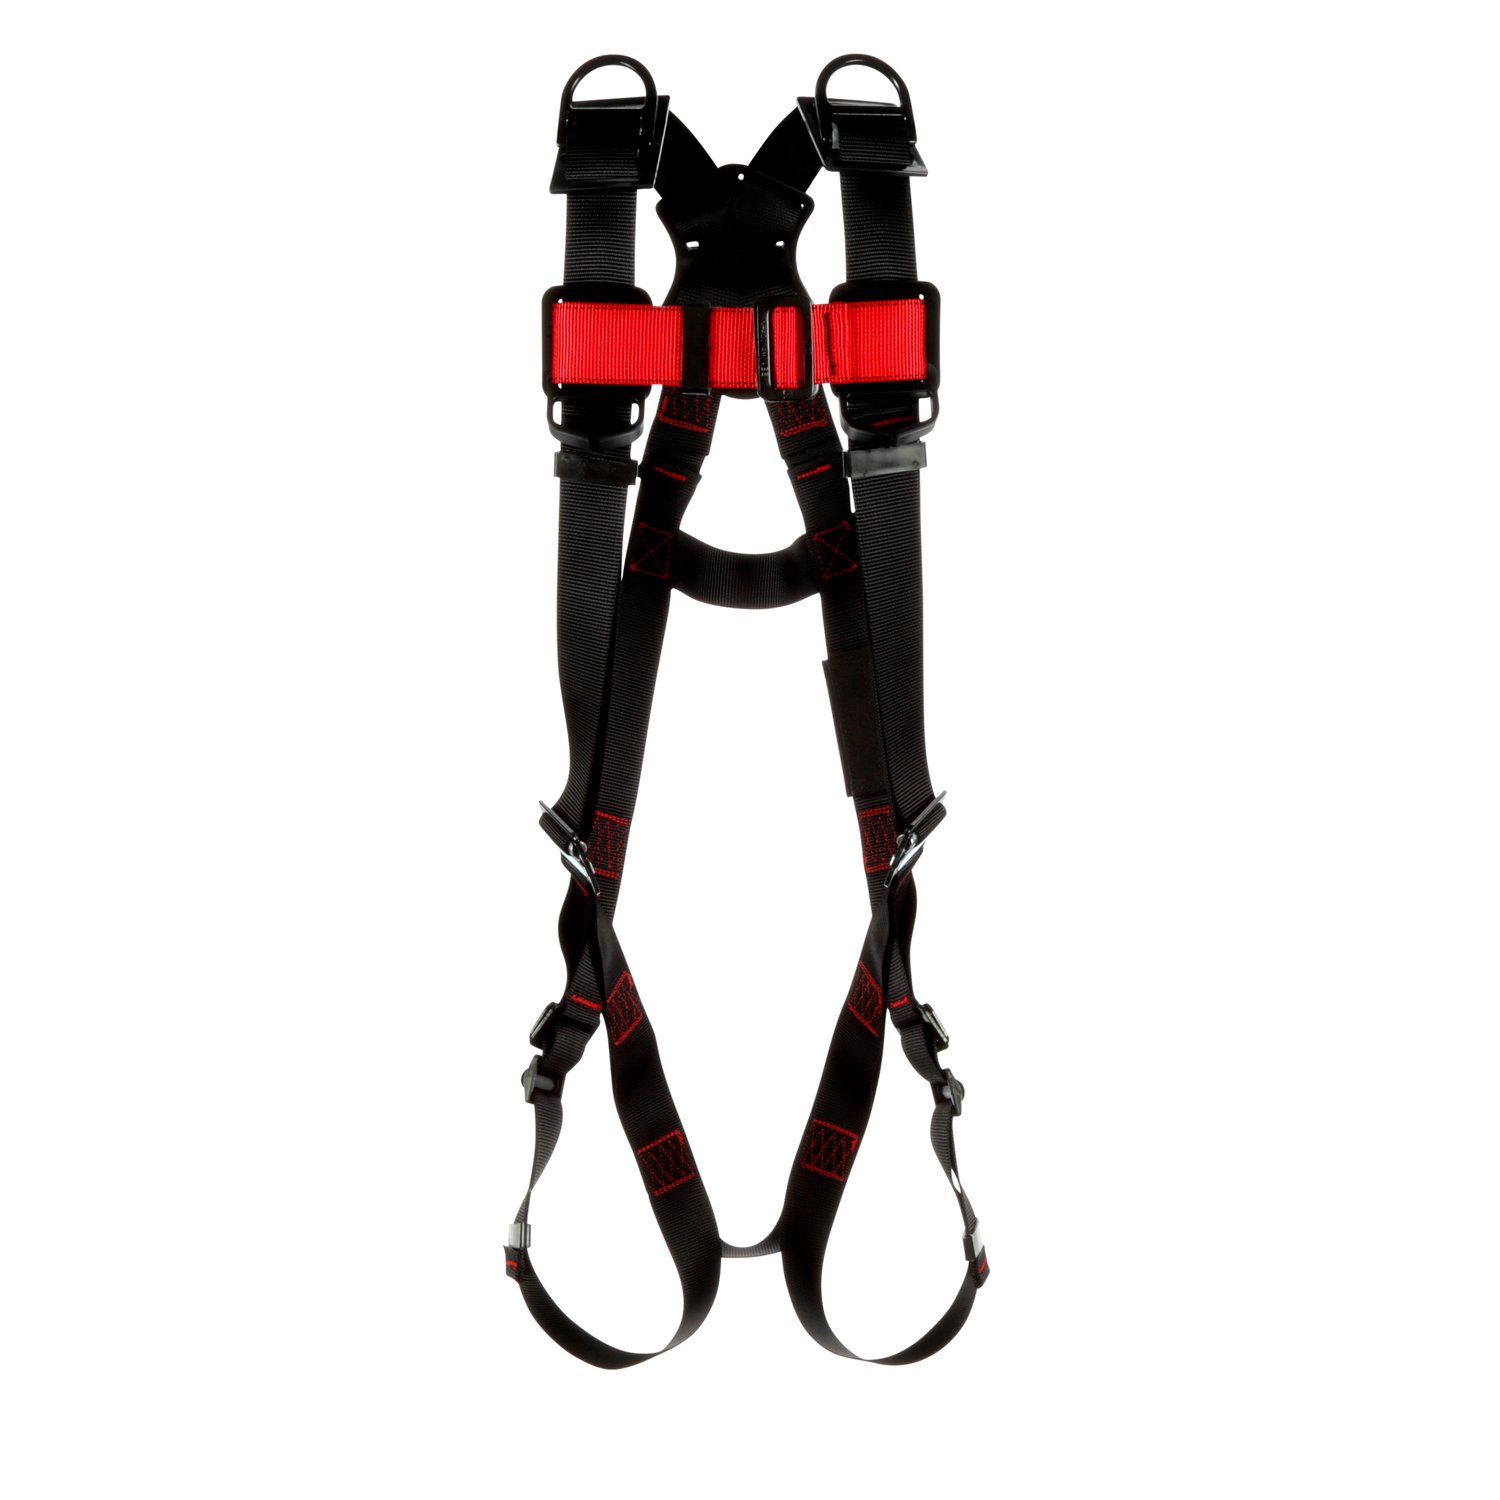 7012816861 - 3M Protecta P200 Vest Retrieval Safety Harness 1161576, Small